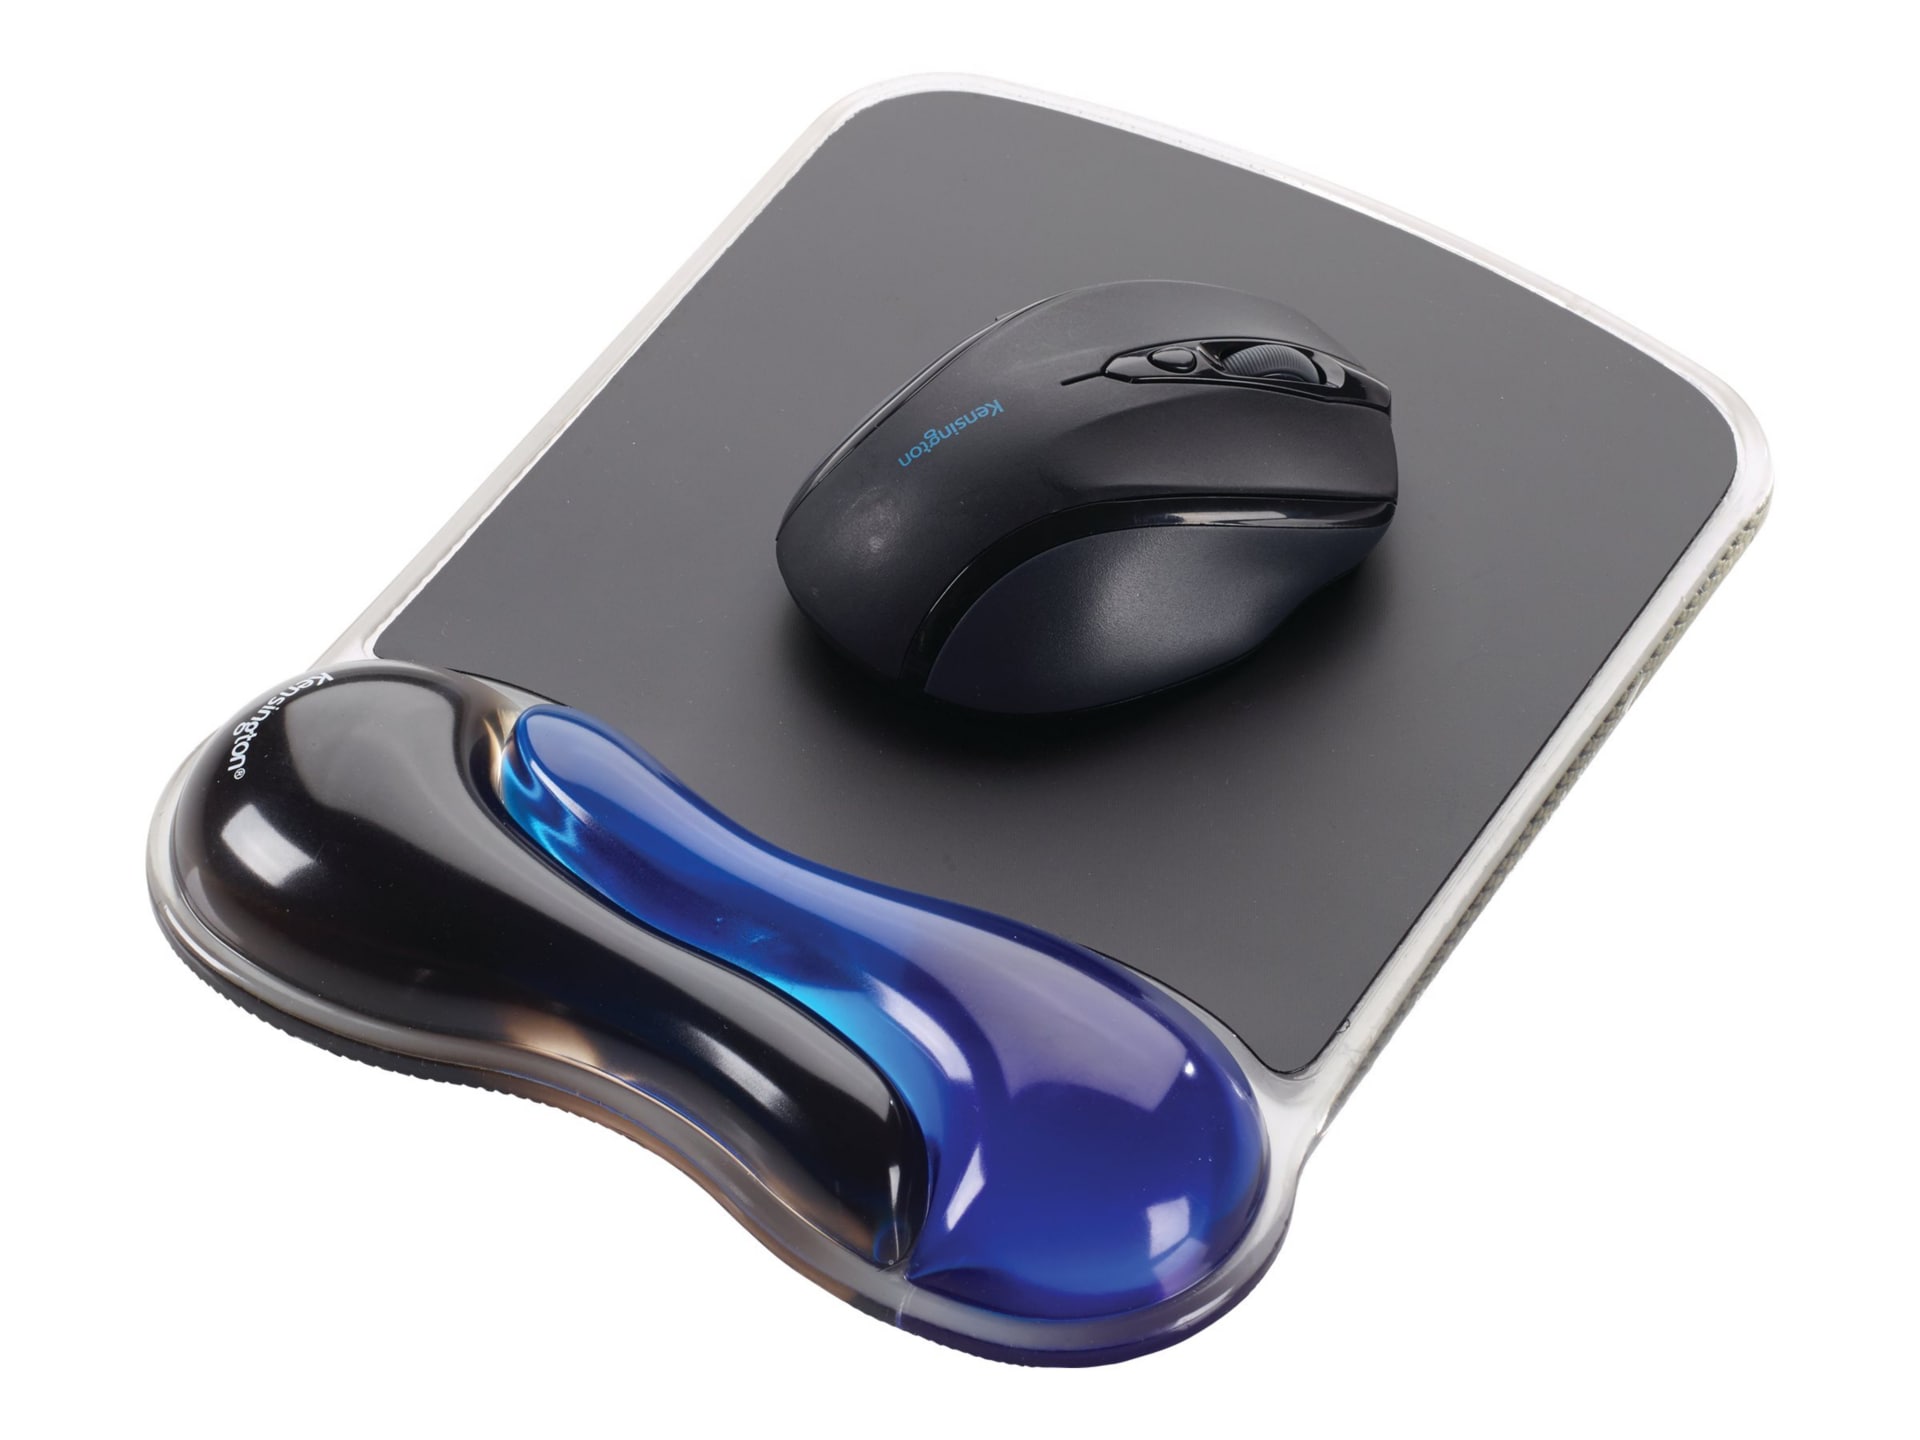 Kensington Duo Gel Mouse Pad - mouse pad with wrist pillow